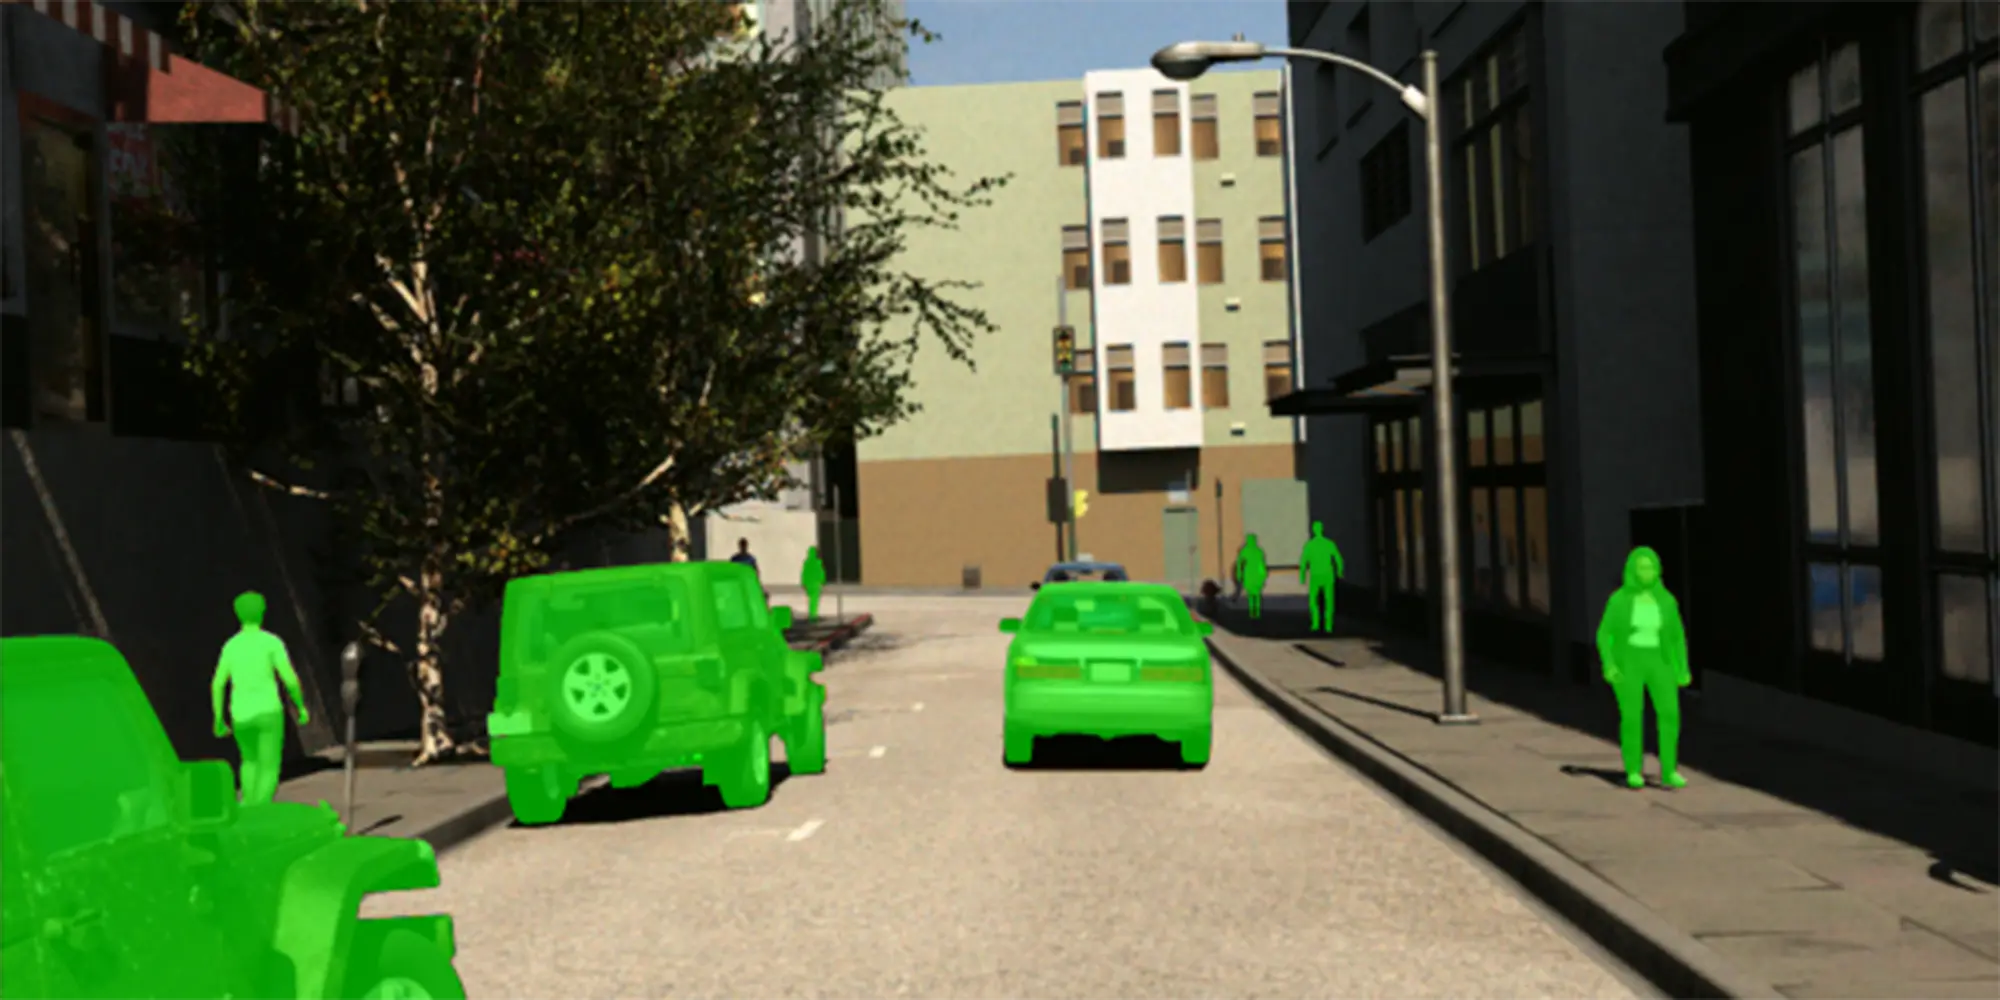 view looking downstreet as cars and pedestrians are glowing green